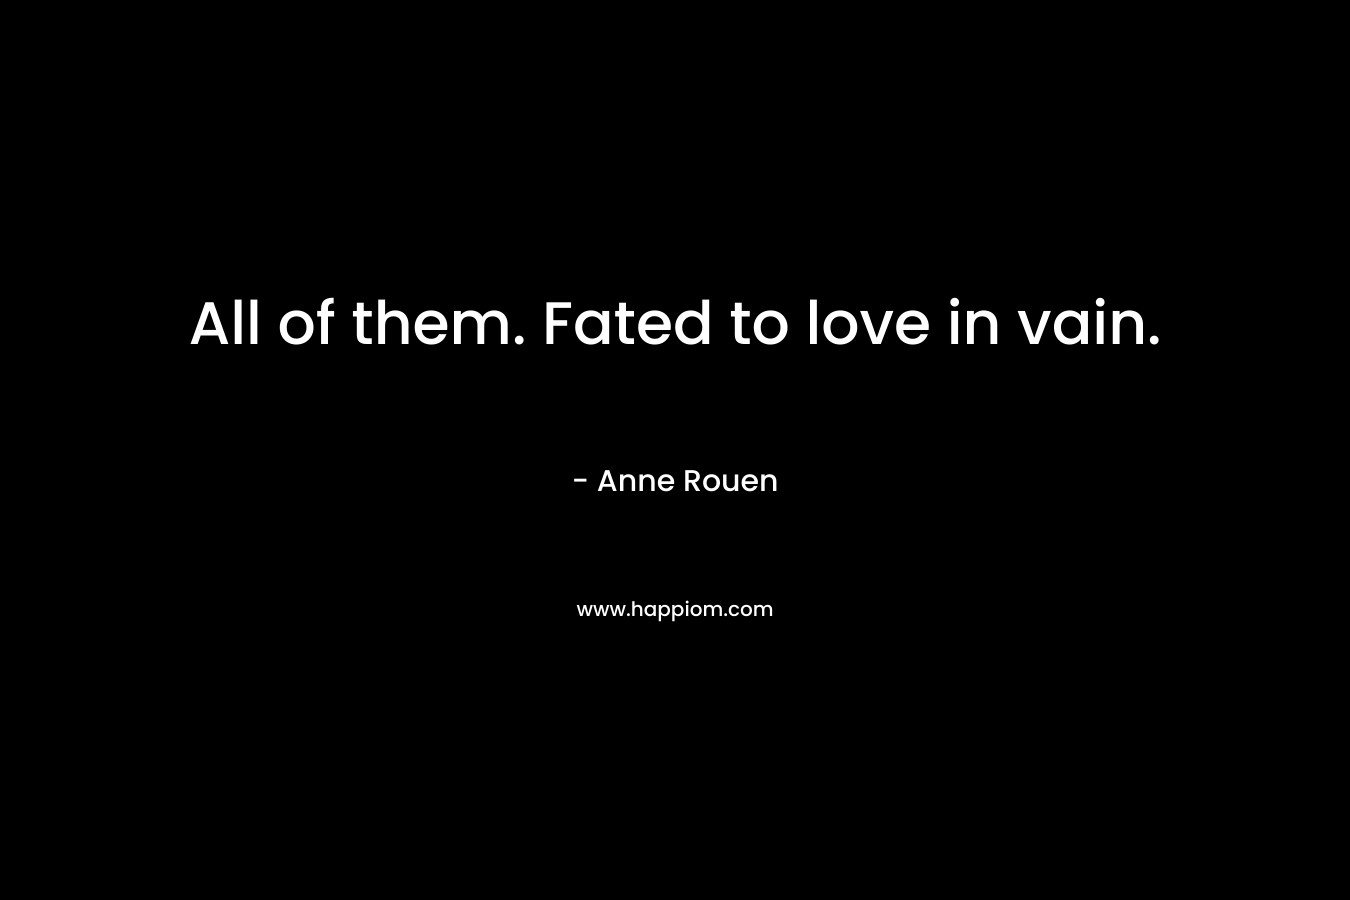 All of them. Fated to love in vain. – Anne Rouen